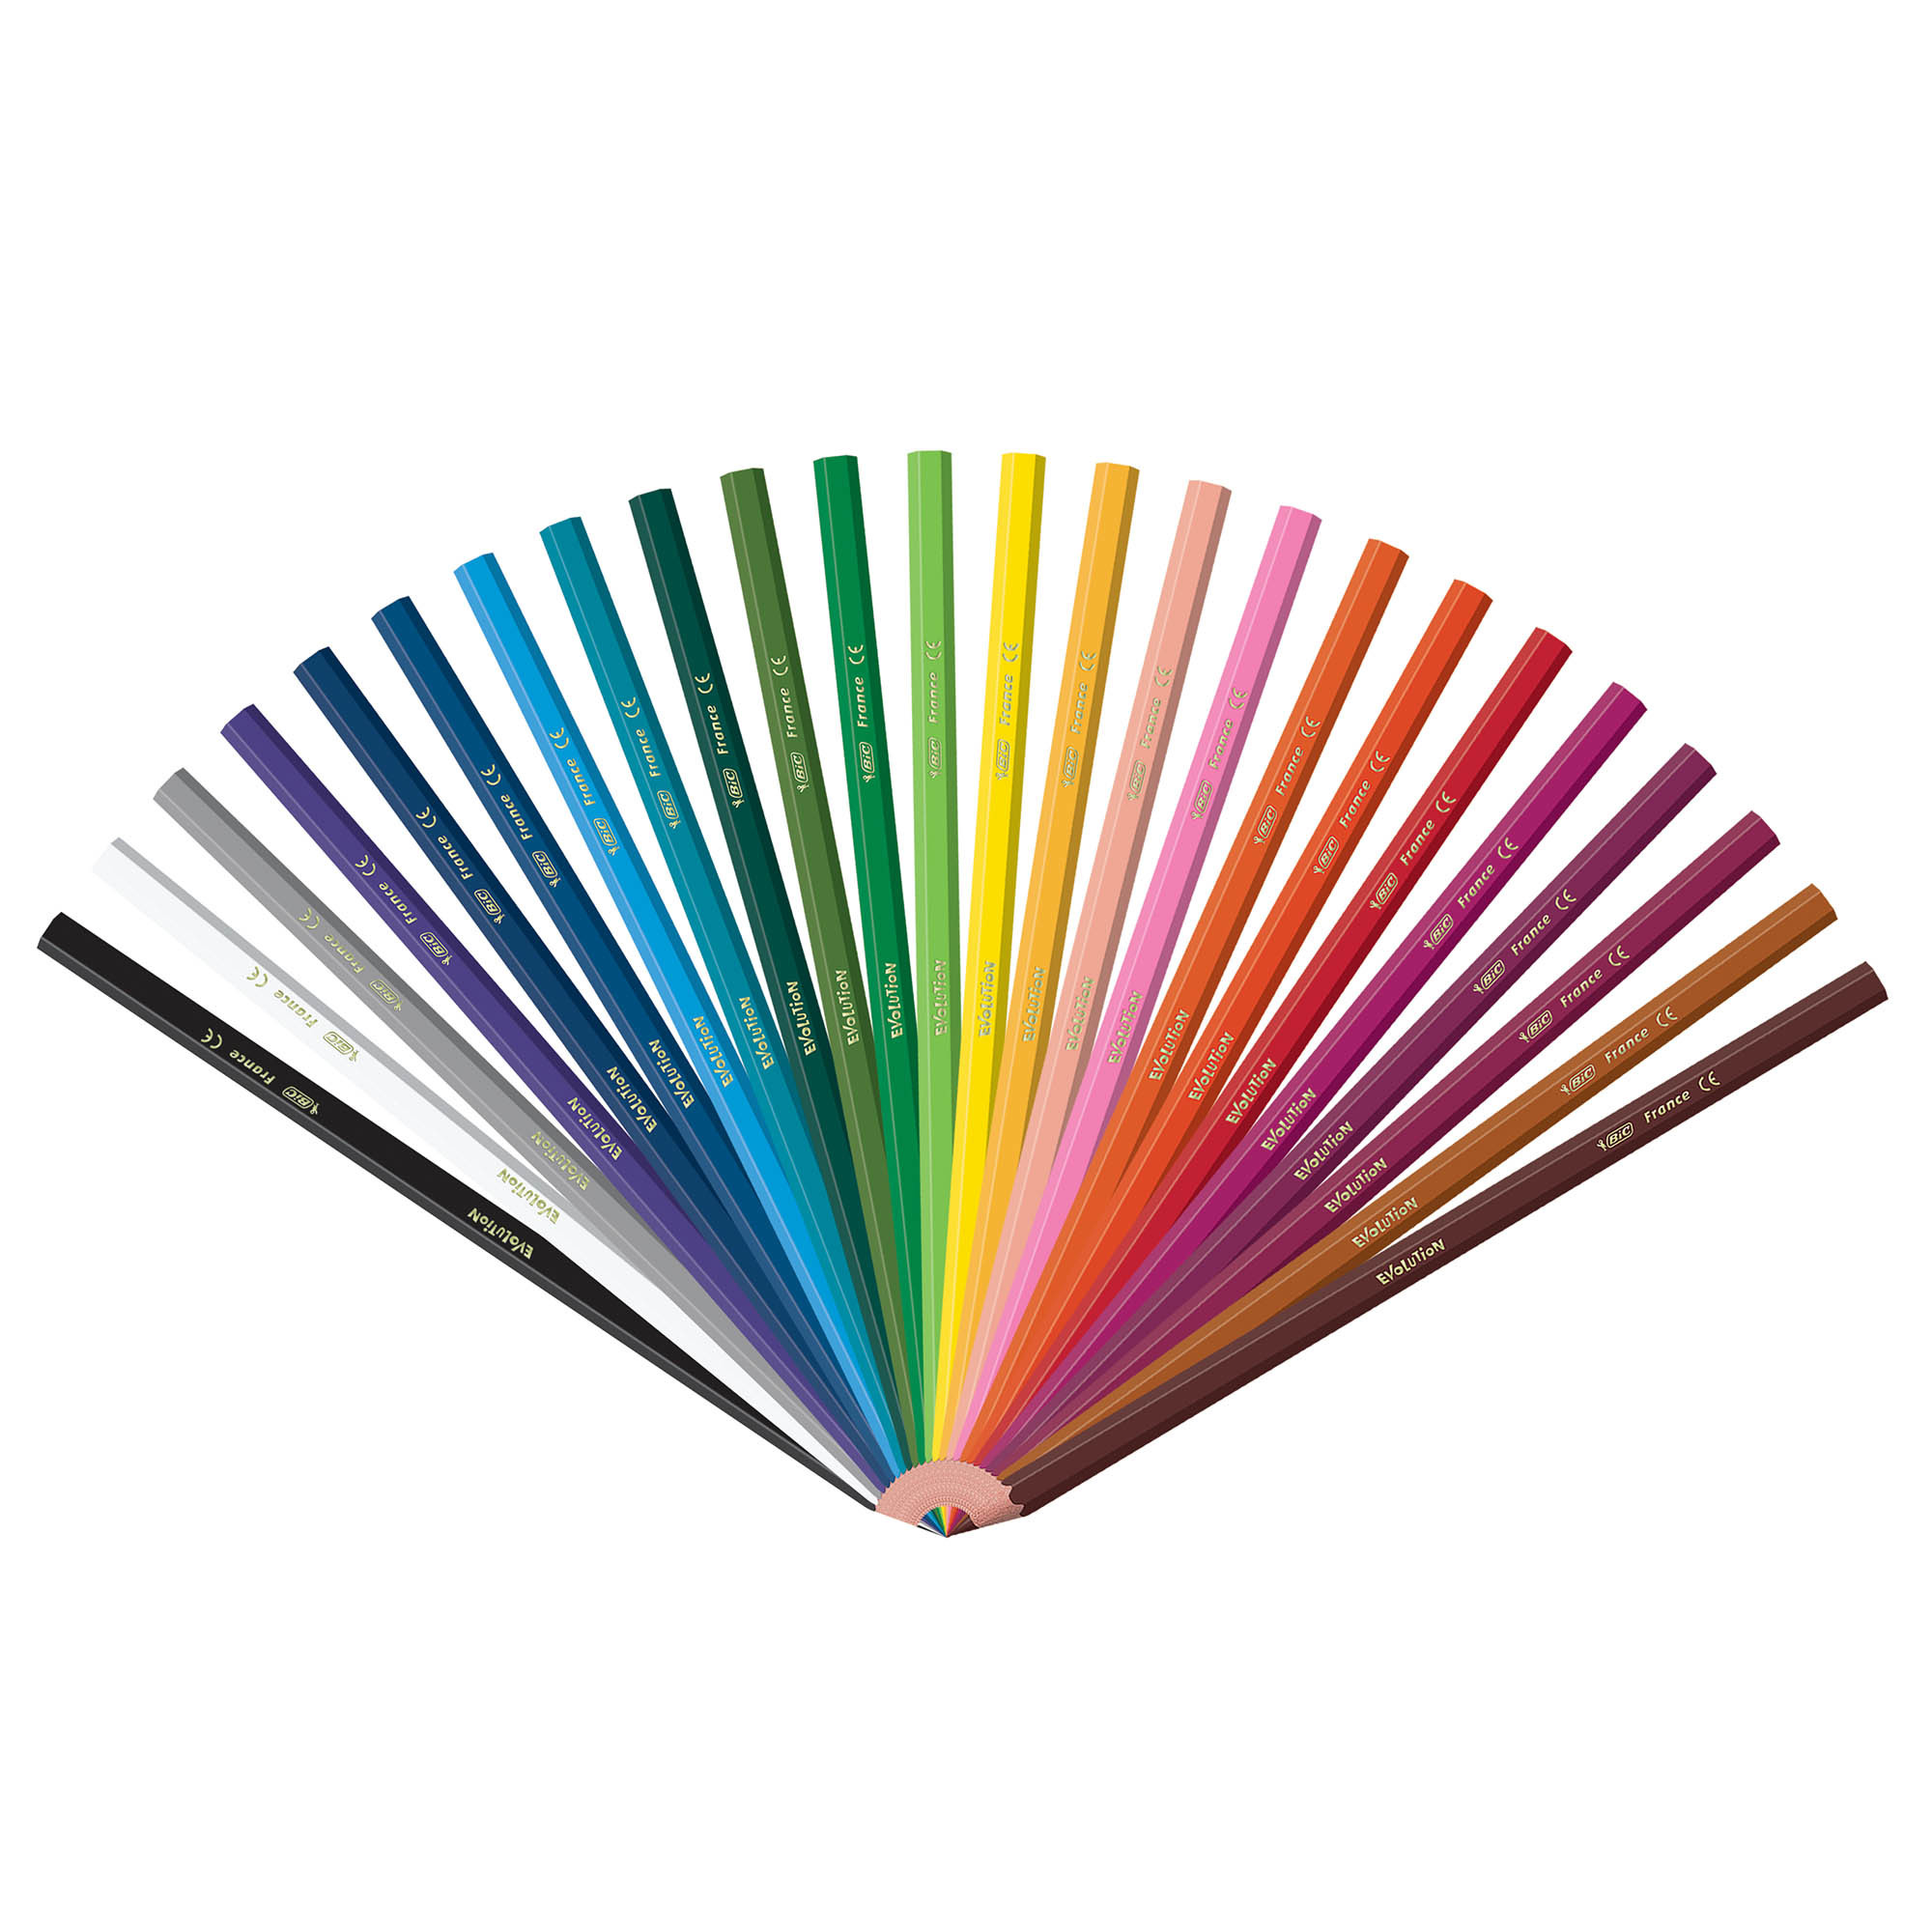 BIC Kids Coloring Pencils, Assorted Colors, 2 Packs of 24 Colored Pencils - image 2 of 6